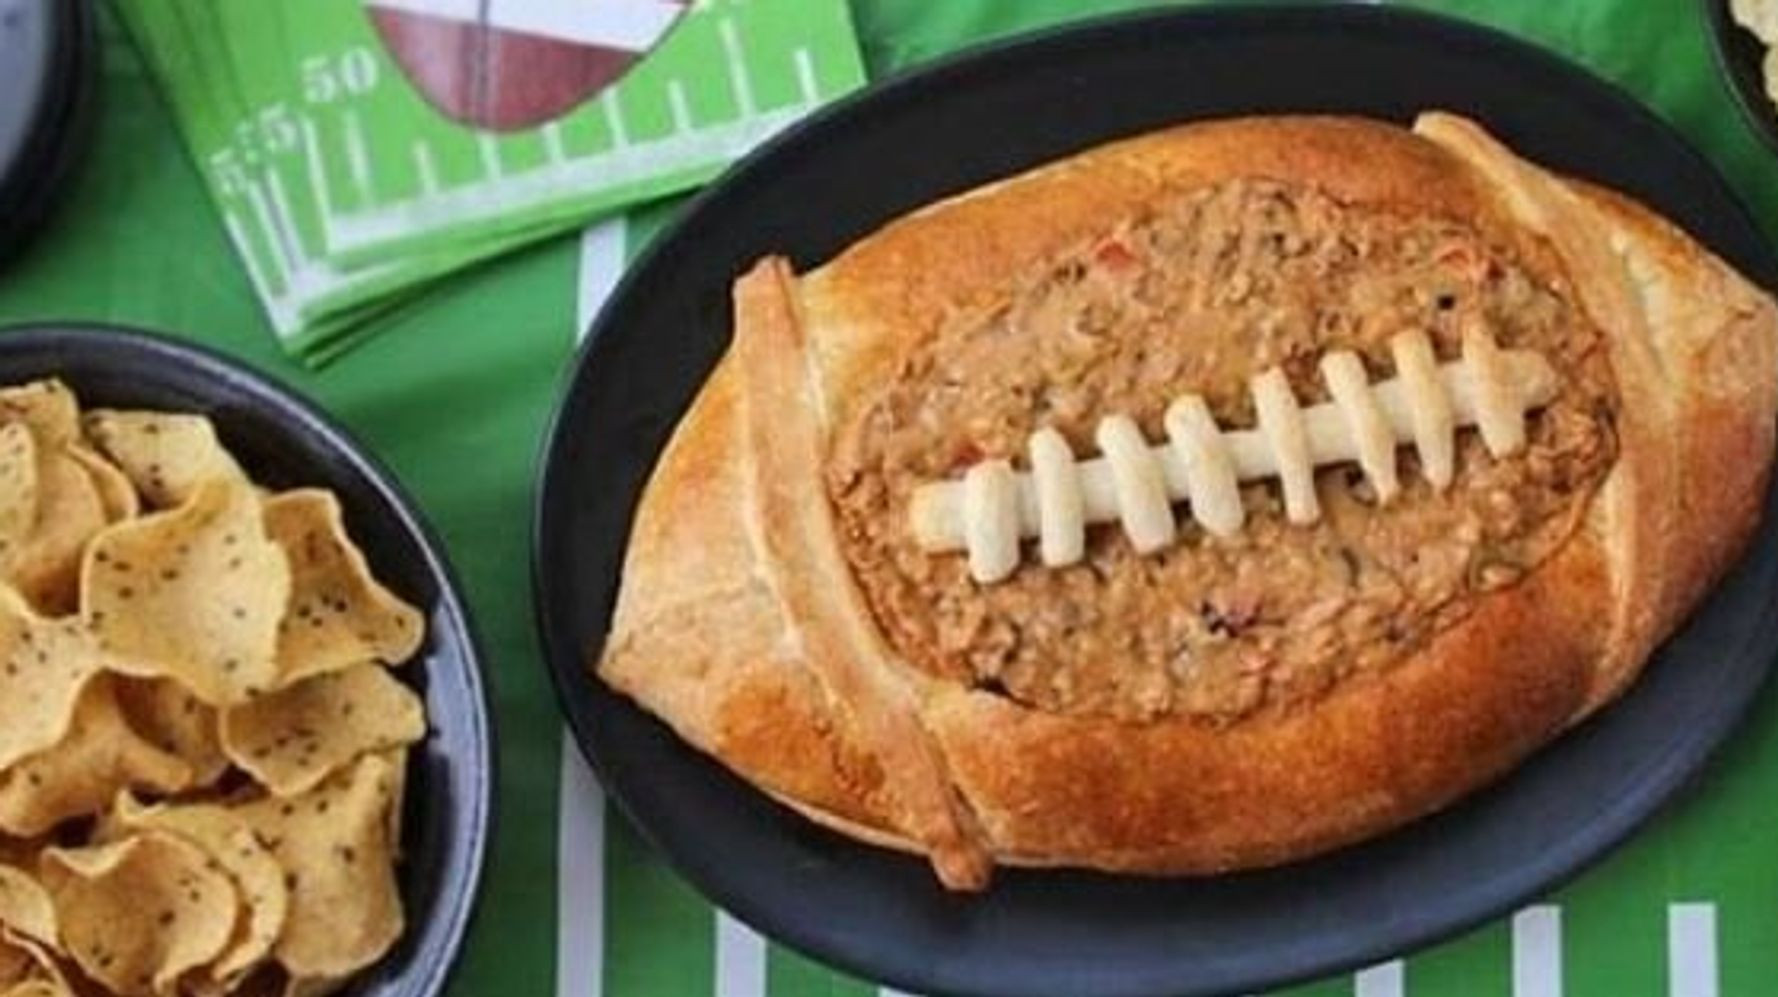 Tasty Super Bowl Recipes
 12 Tasty Super Bowl Recipes For Your Party